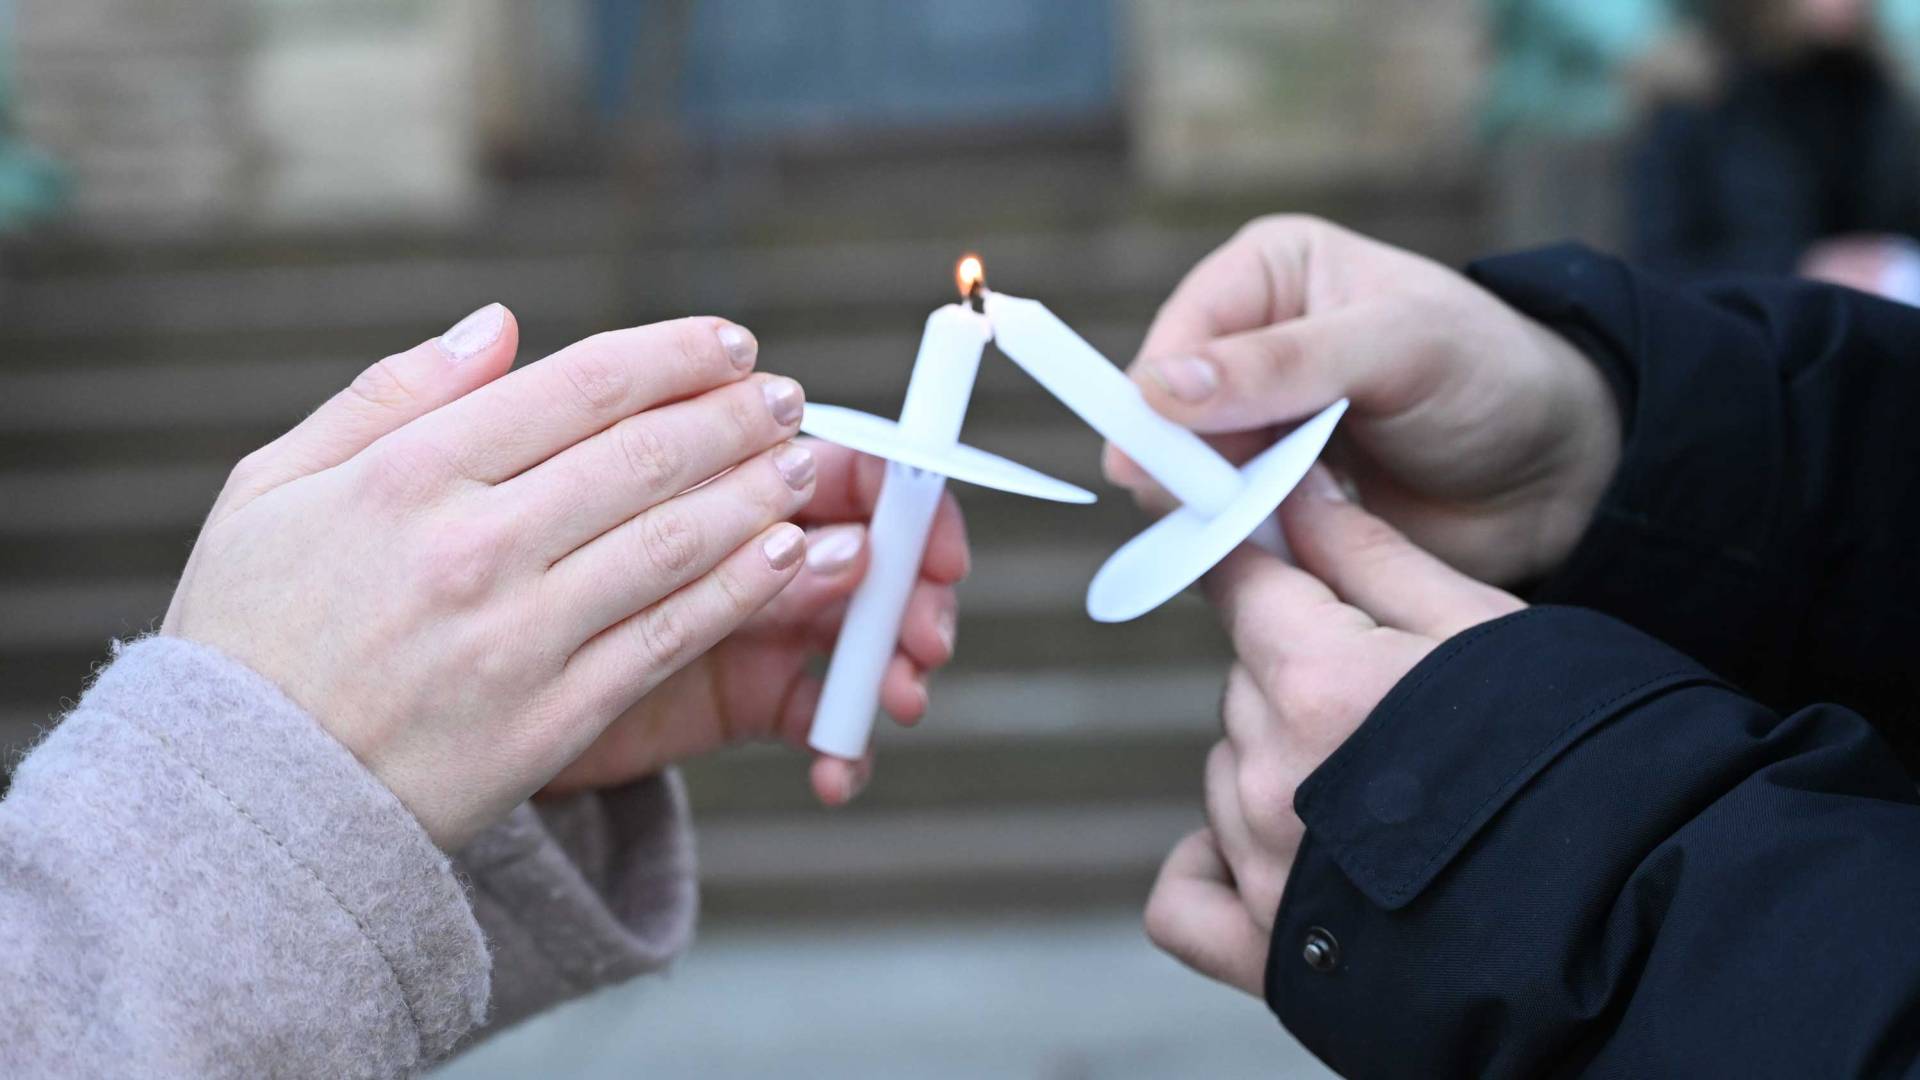 hands holding candles at a vigil